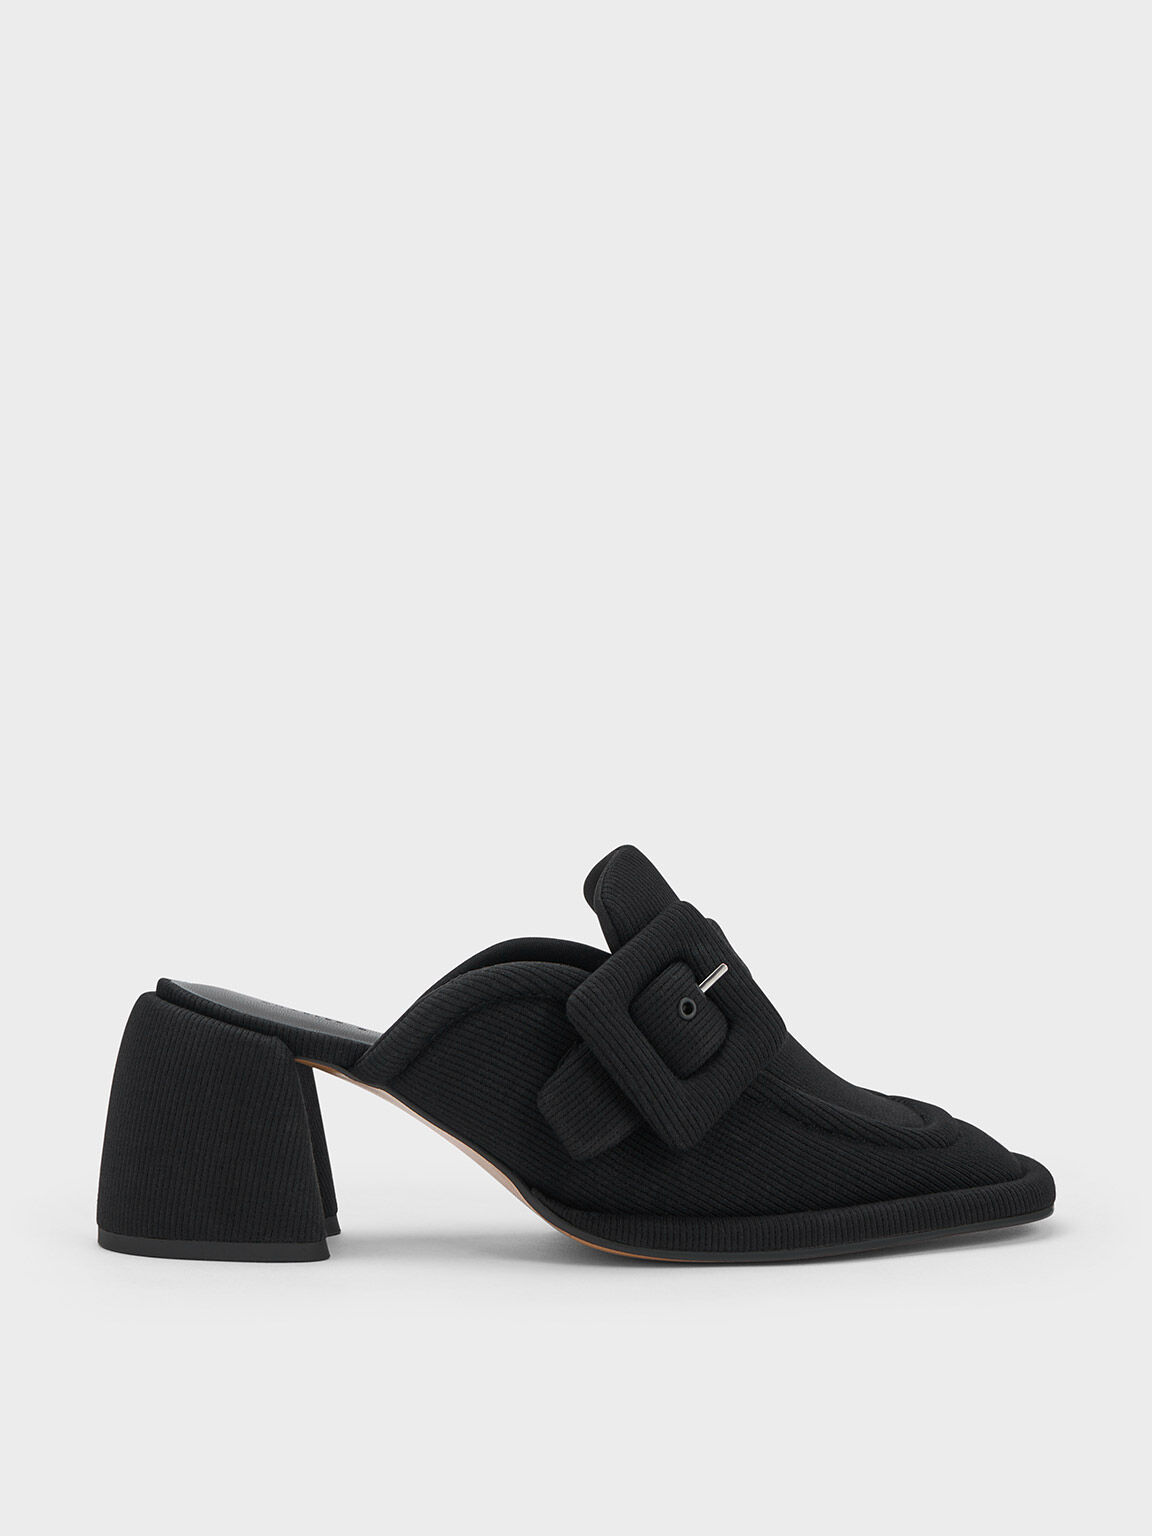 Women’s New Arrivals | Shop Latest Styles | CHARLES & KEITH UK